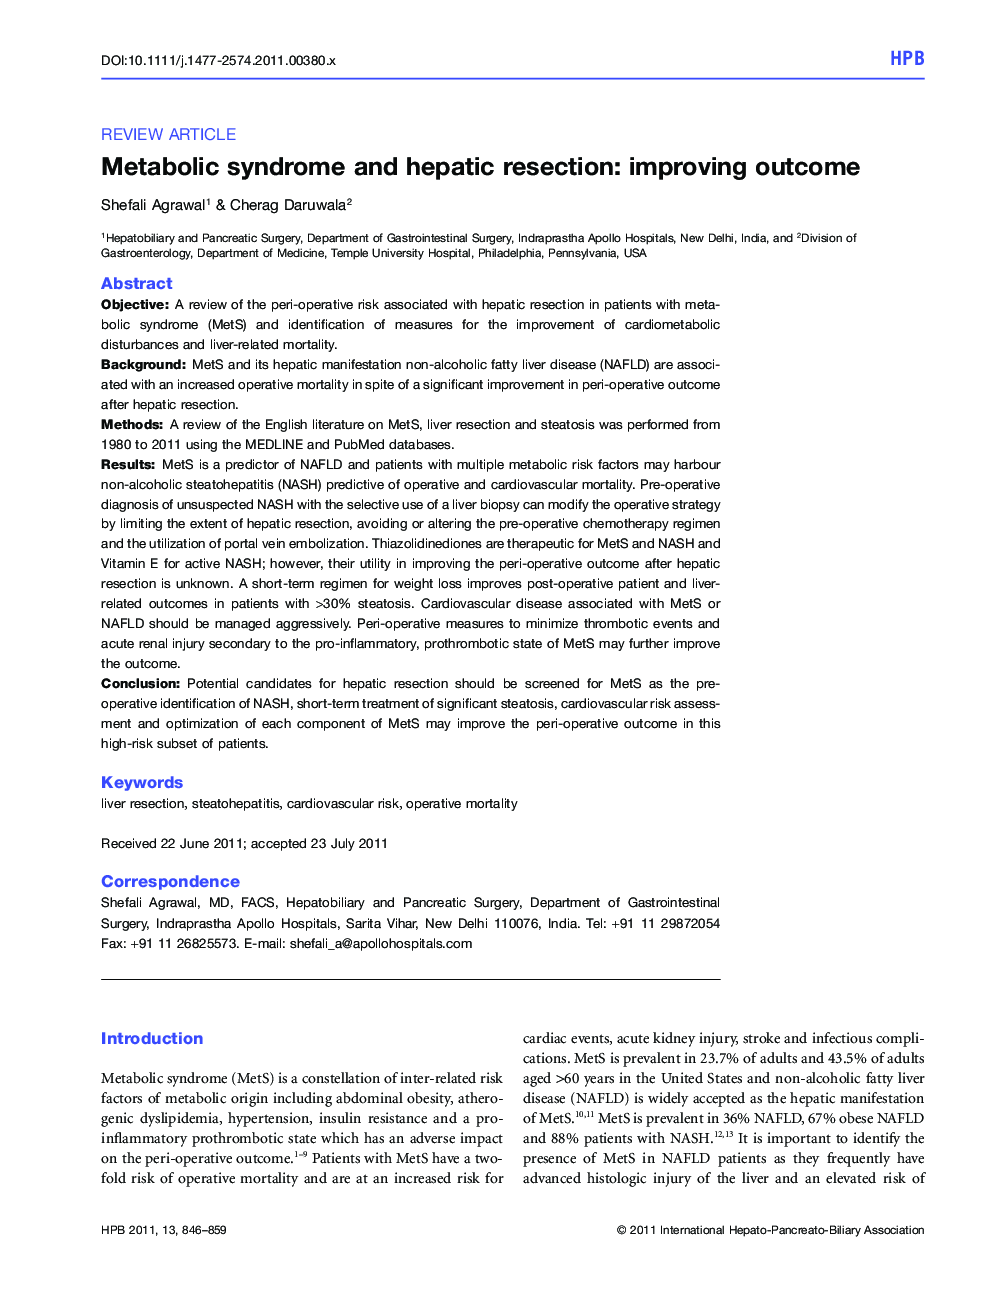 Metabolic syndrome and hepatic resection: improving outcome